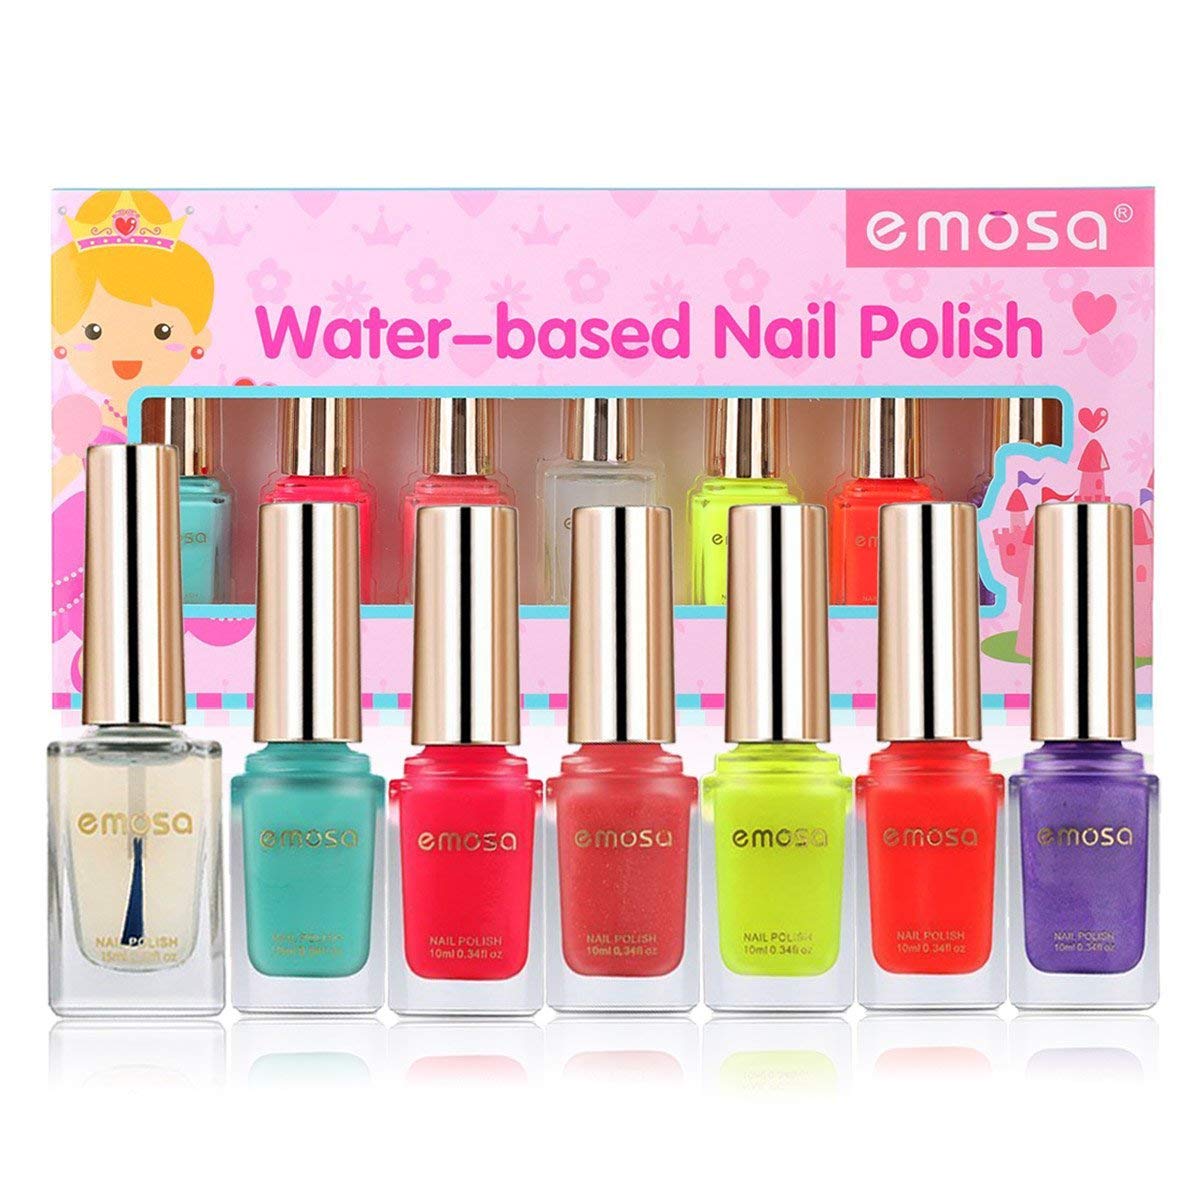 Emosa Nail Polish - Non-Toxic Water Based Peelable Natural, Safe and Chemical Free, Kids Friendly Makeup Set for Little Girls